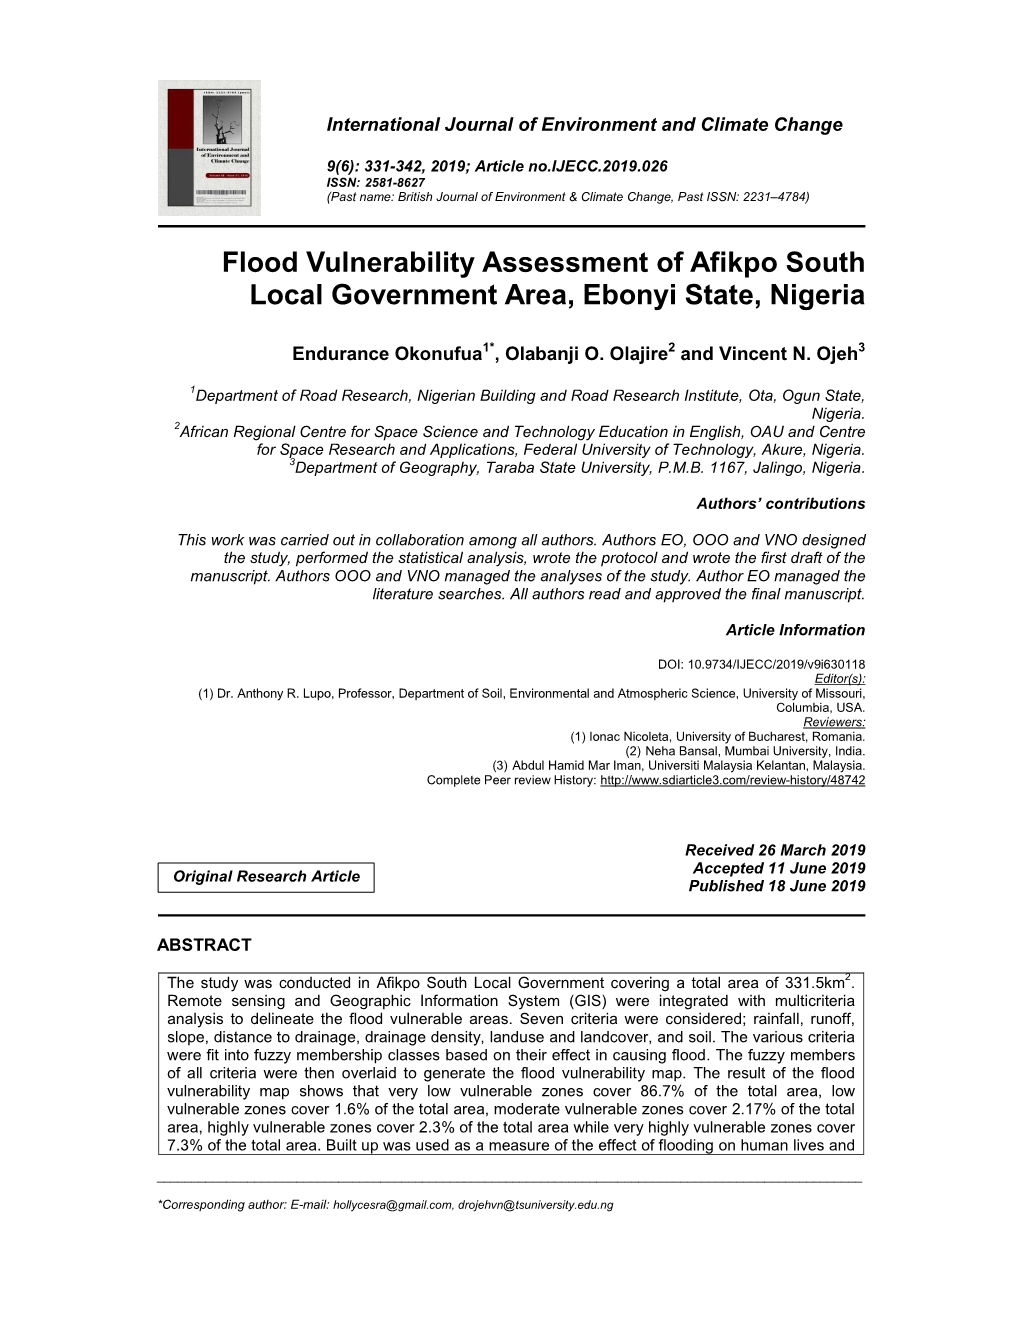 Flood Vulnerability Assessment of Afikpo South Local Government Area, Ebonyi State, Nigeria